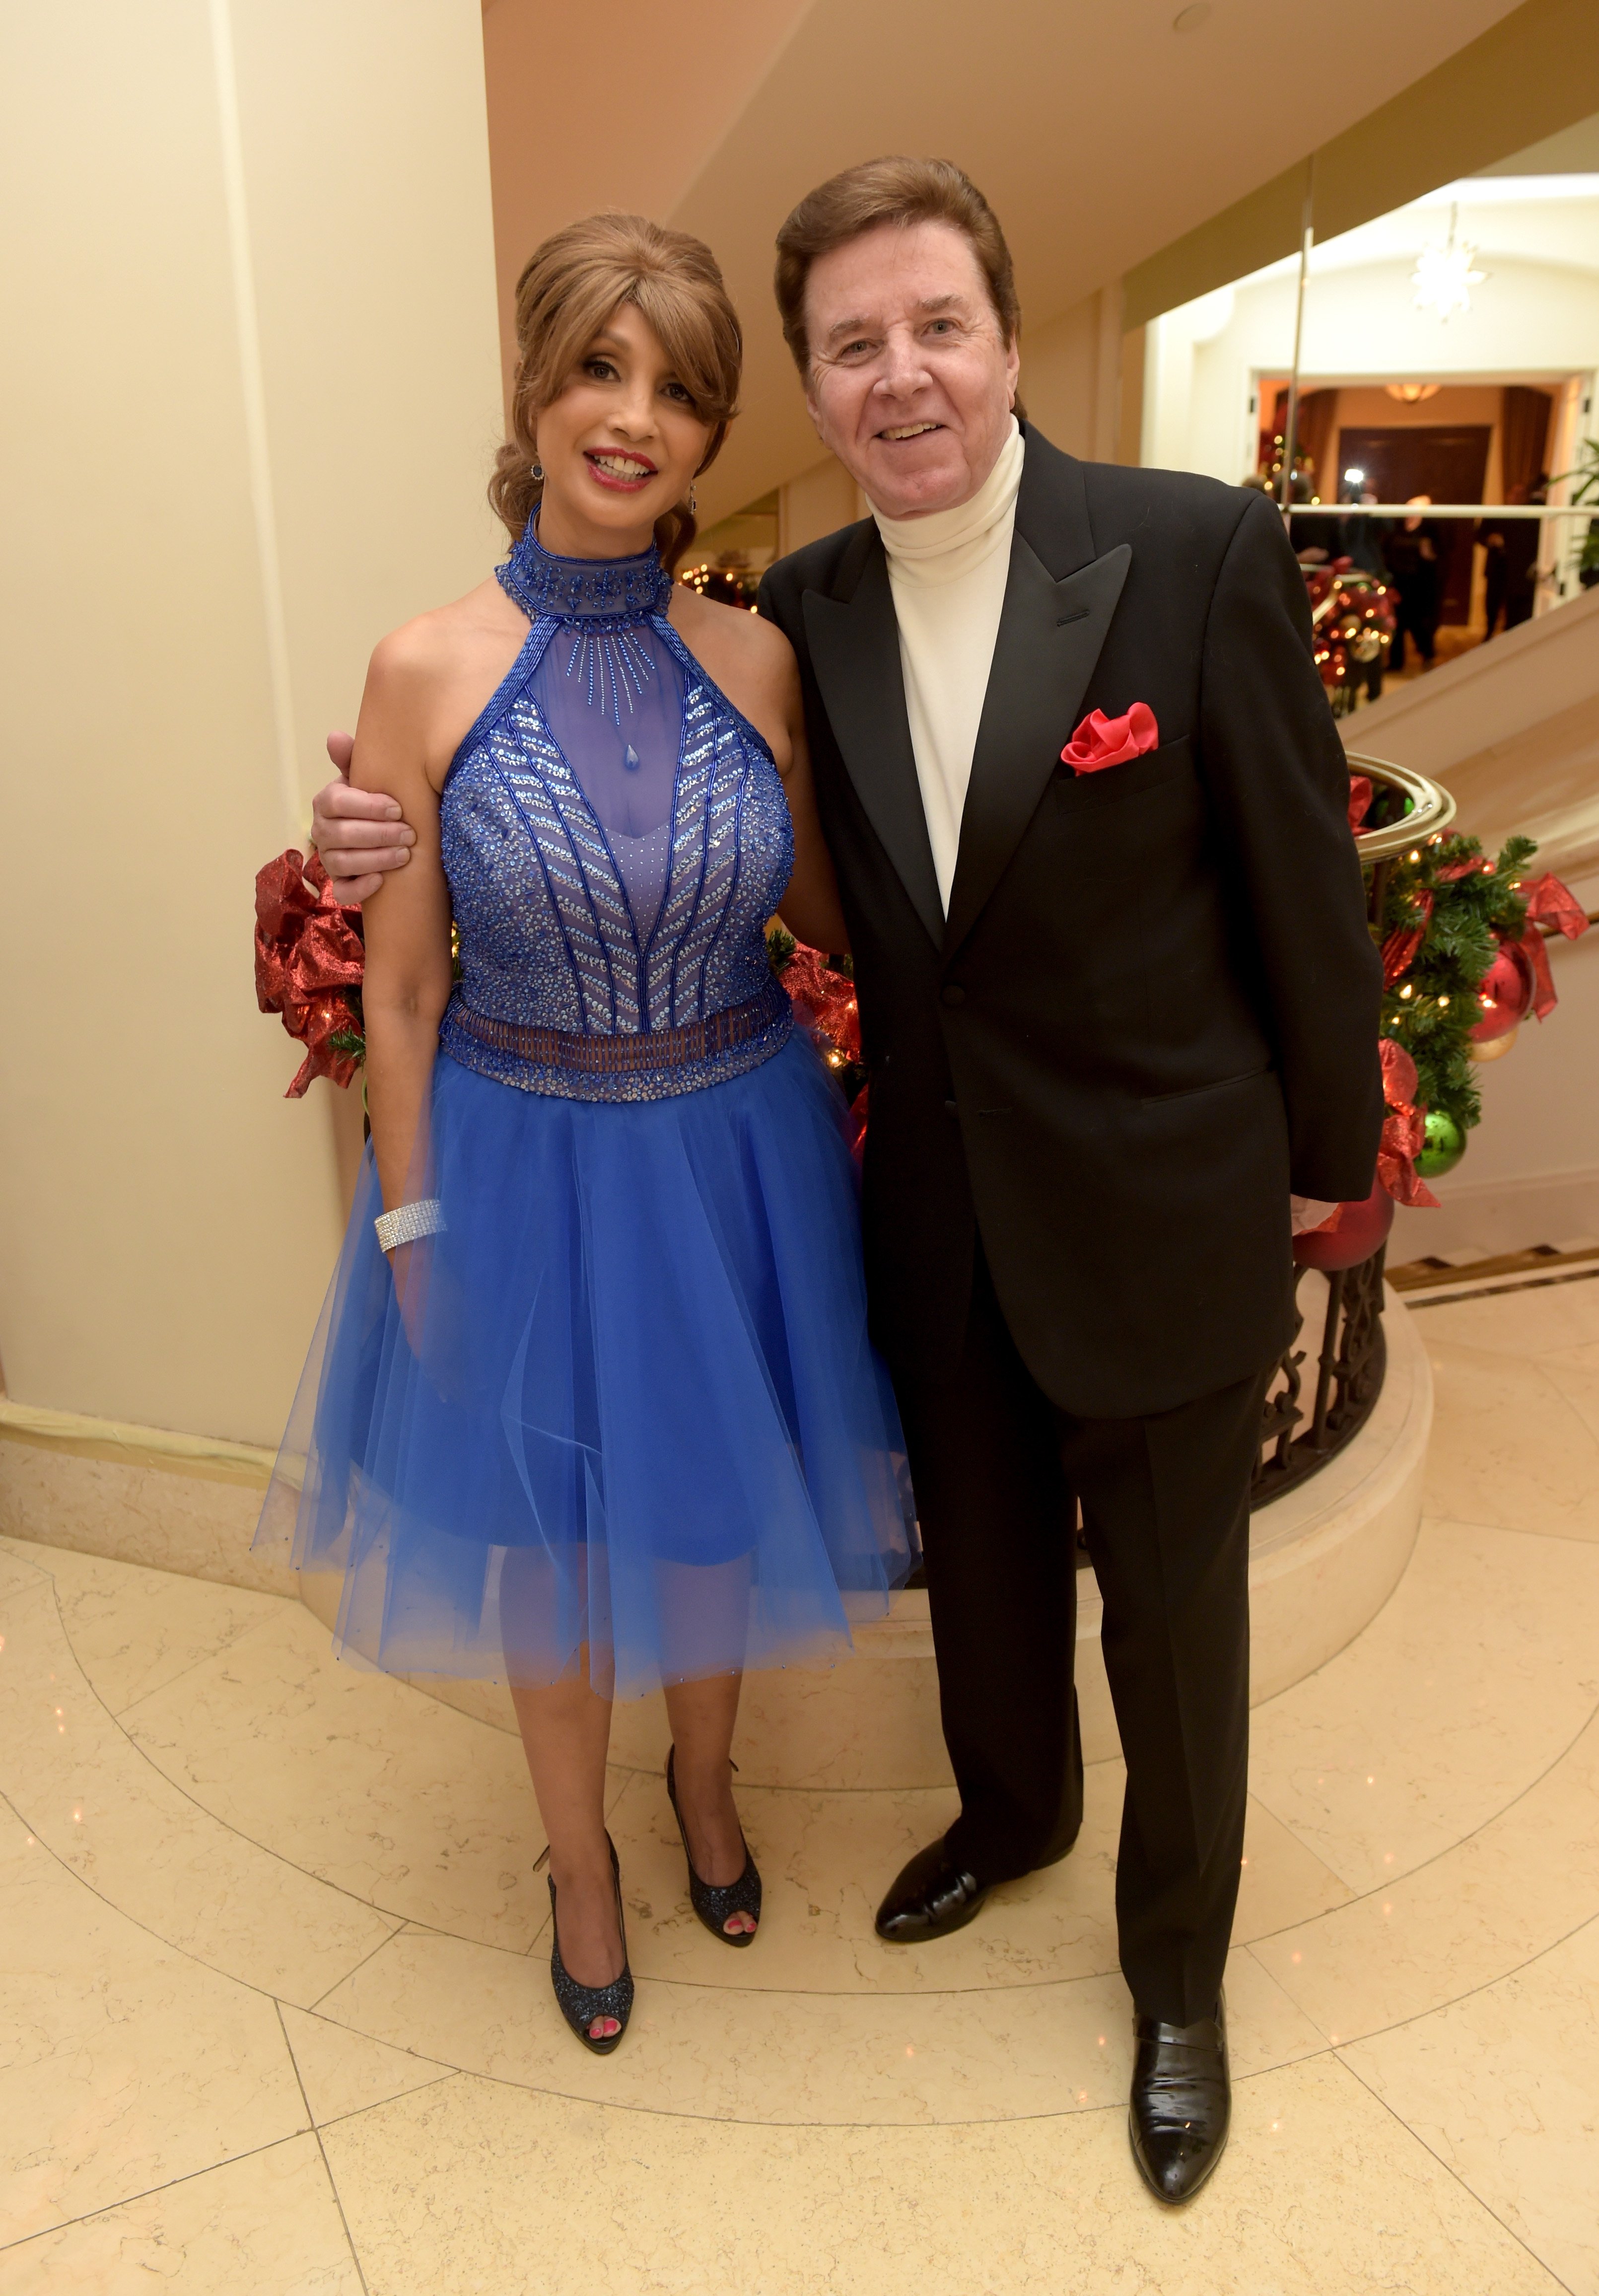 Singer Bobby Sherman and his wife, Brigitte Sherman, at Montage Beverly Hills on December 19, 2015 in Beverly Hills, California | Source: Getty Images